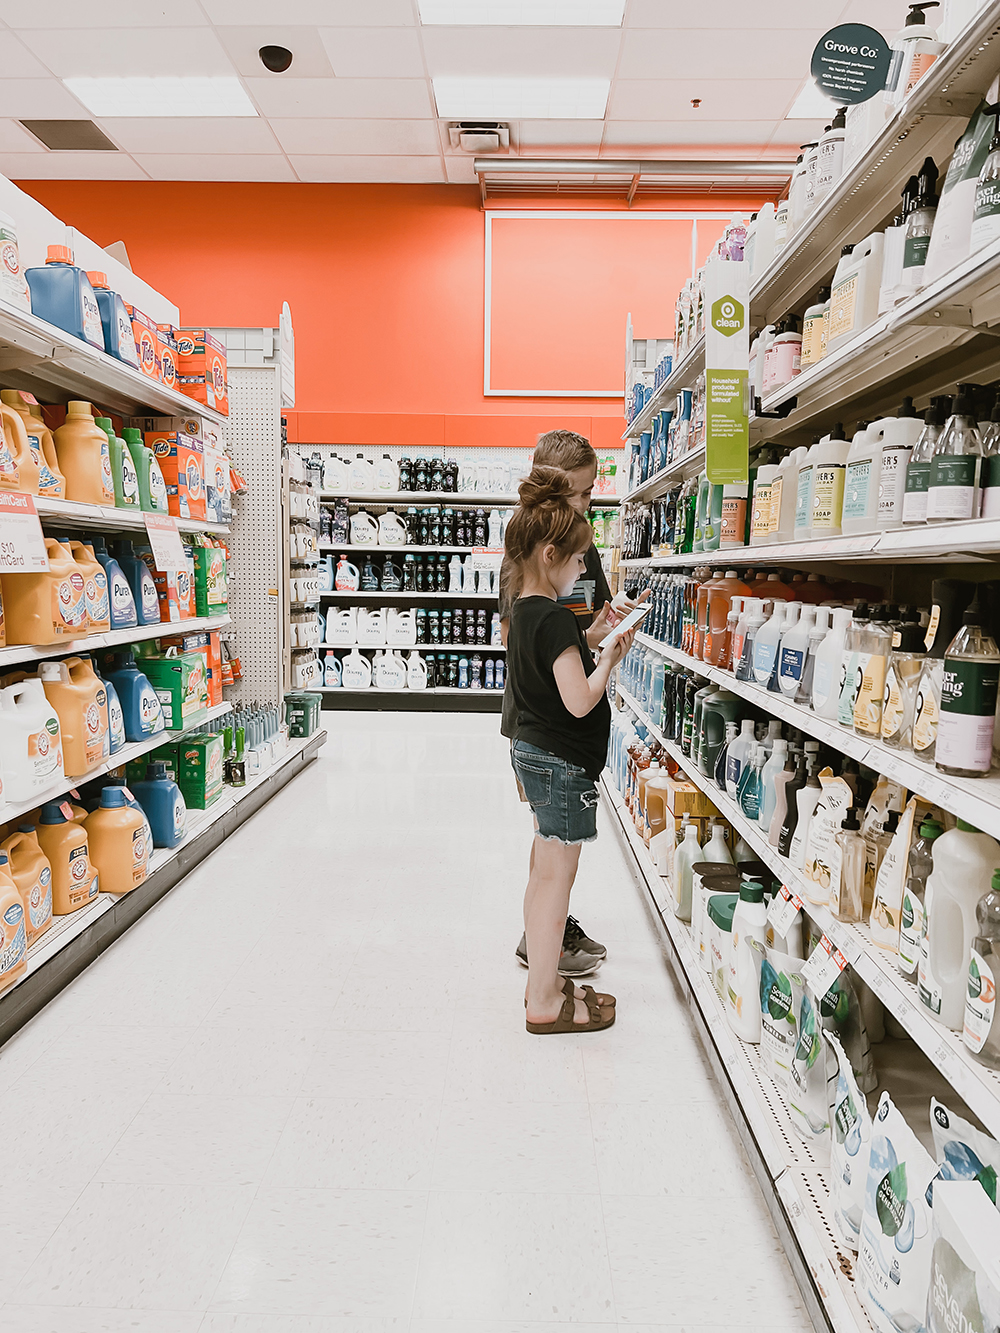 How I shop for cleaner products & better options to help reduce our family's toxin load and make our home safer. Learn more on KaraLayne.com!